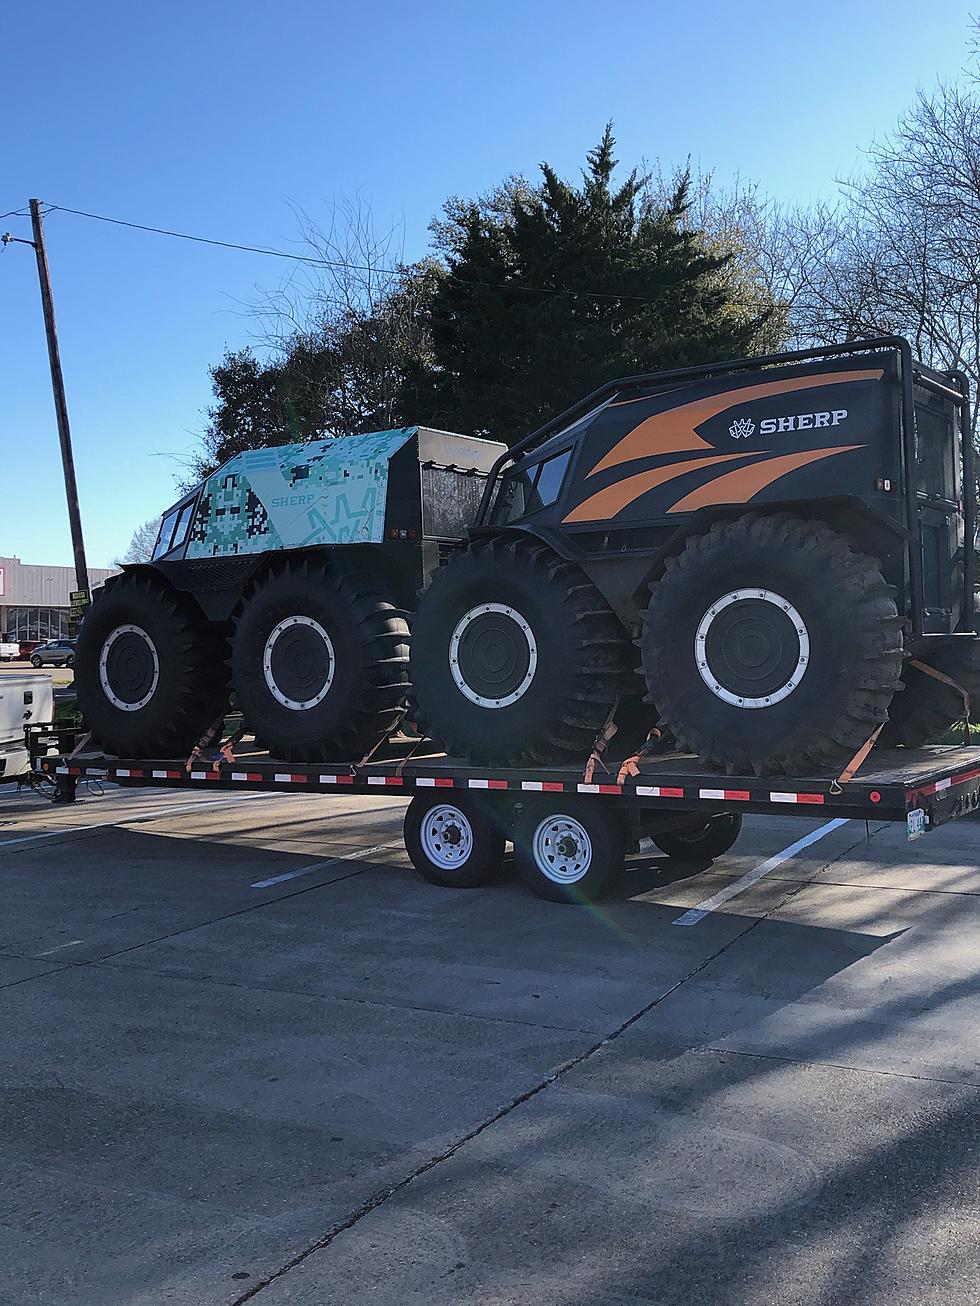 Have You Seen These SHERP ATVs Popping Up Around Acadiana? [Video]